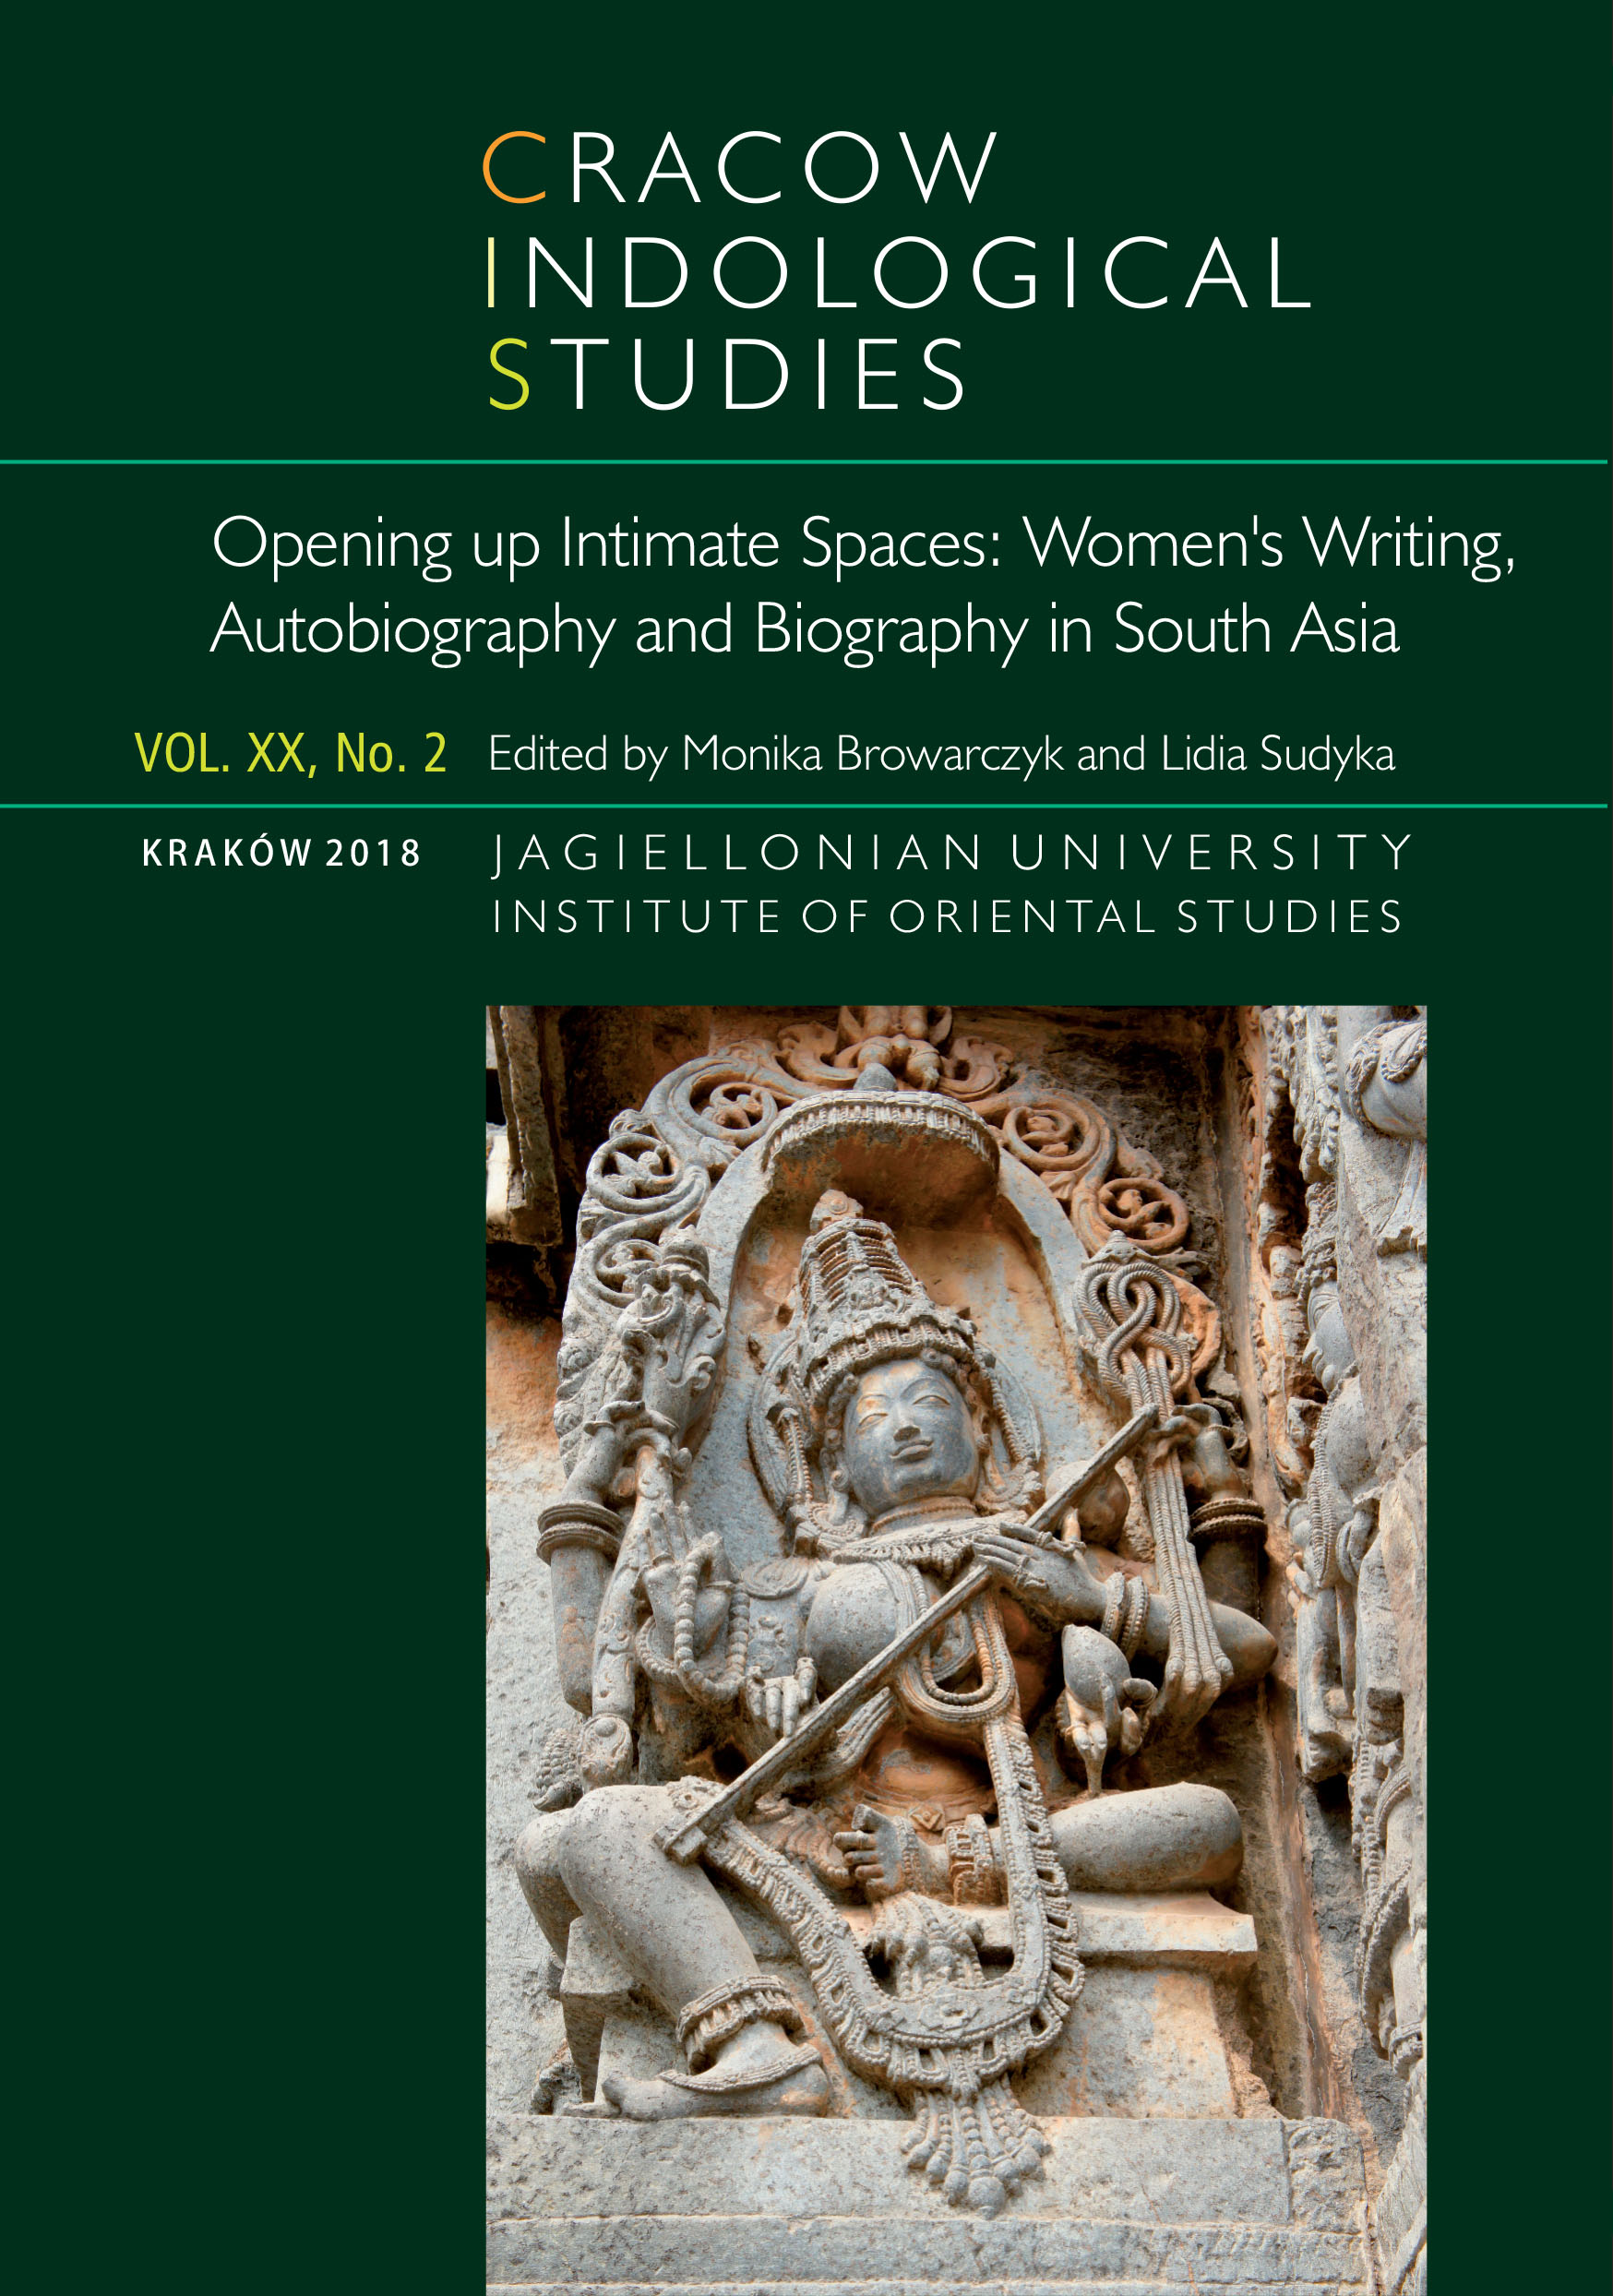 					View Vol. 20 No. 2 (2018): Opening up Intimate Spaces: Women’s Writing and Autobiography in South Asia
				